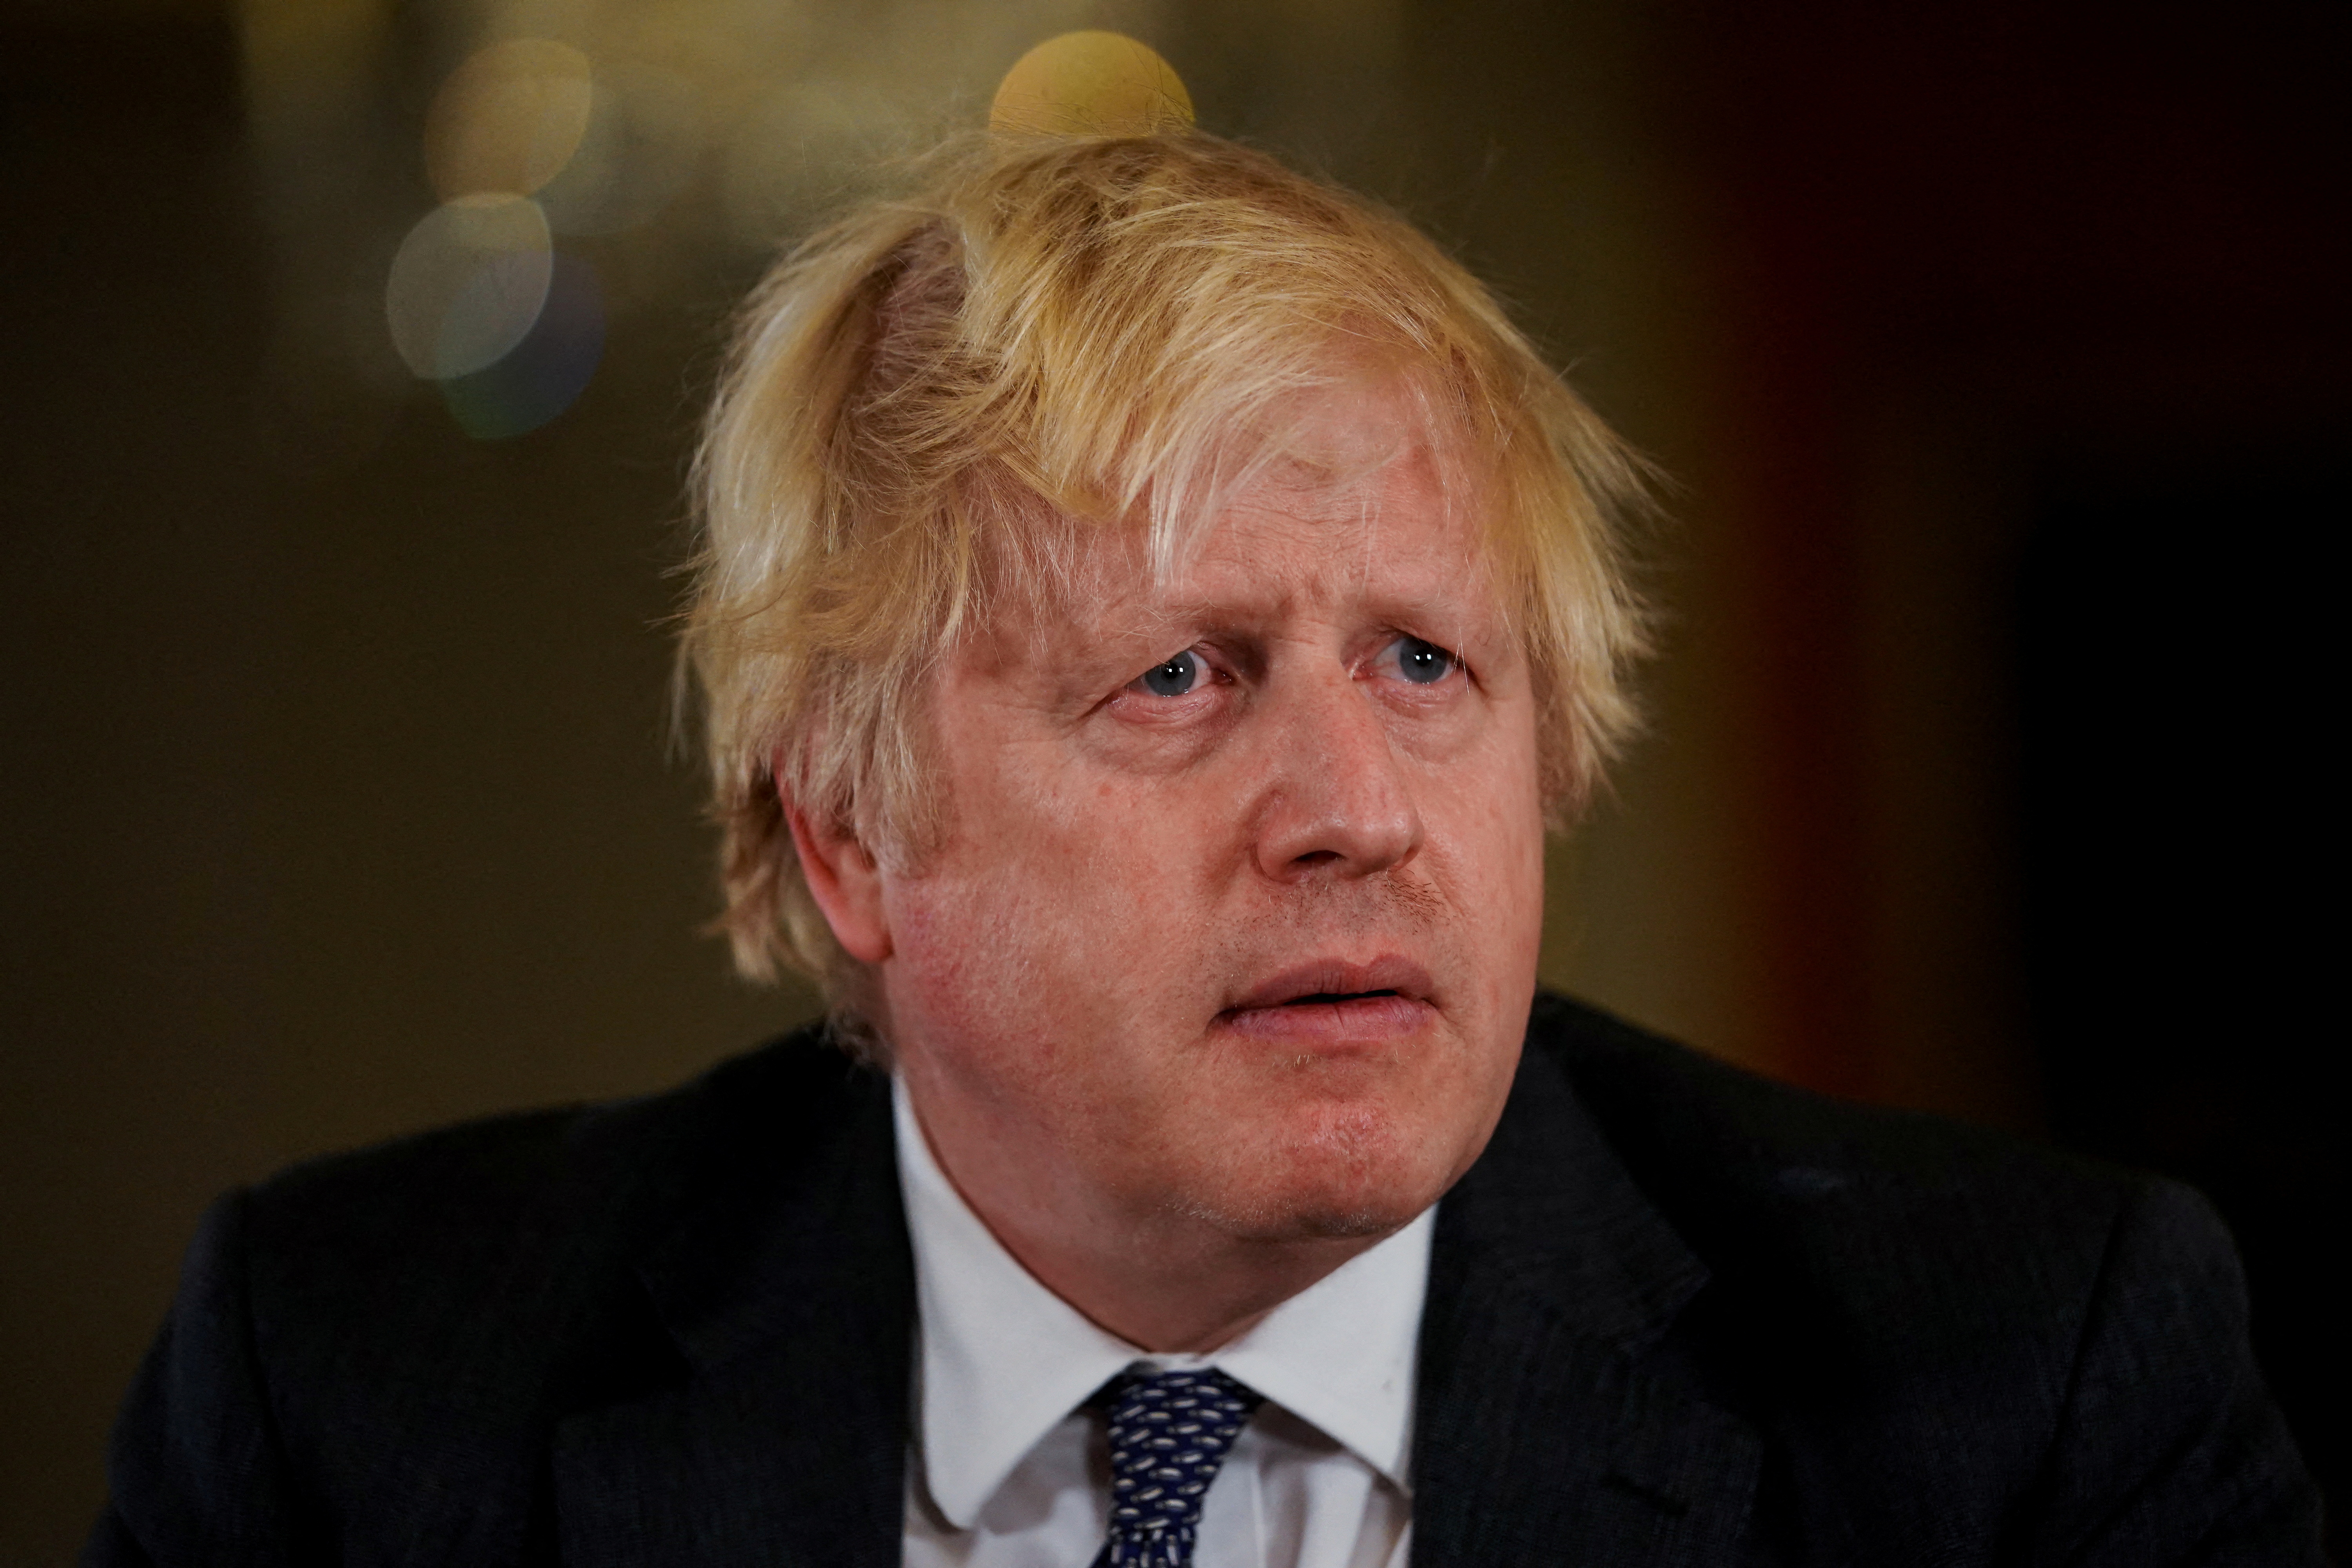 British Prime Minister Boris Johnson records an address to the nation to provide an update on the COVID-19 booster vaccine programme